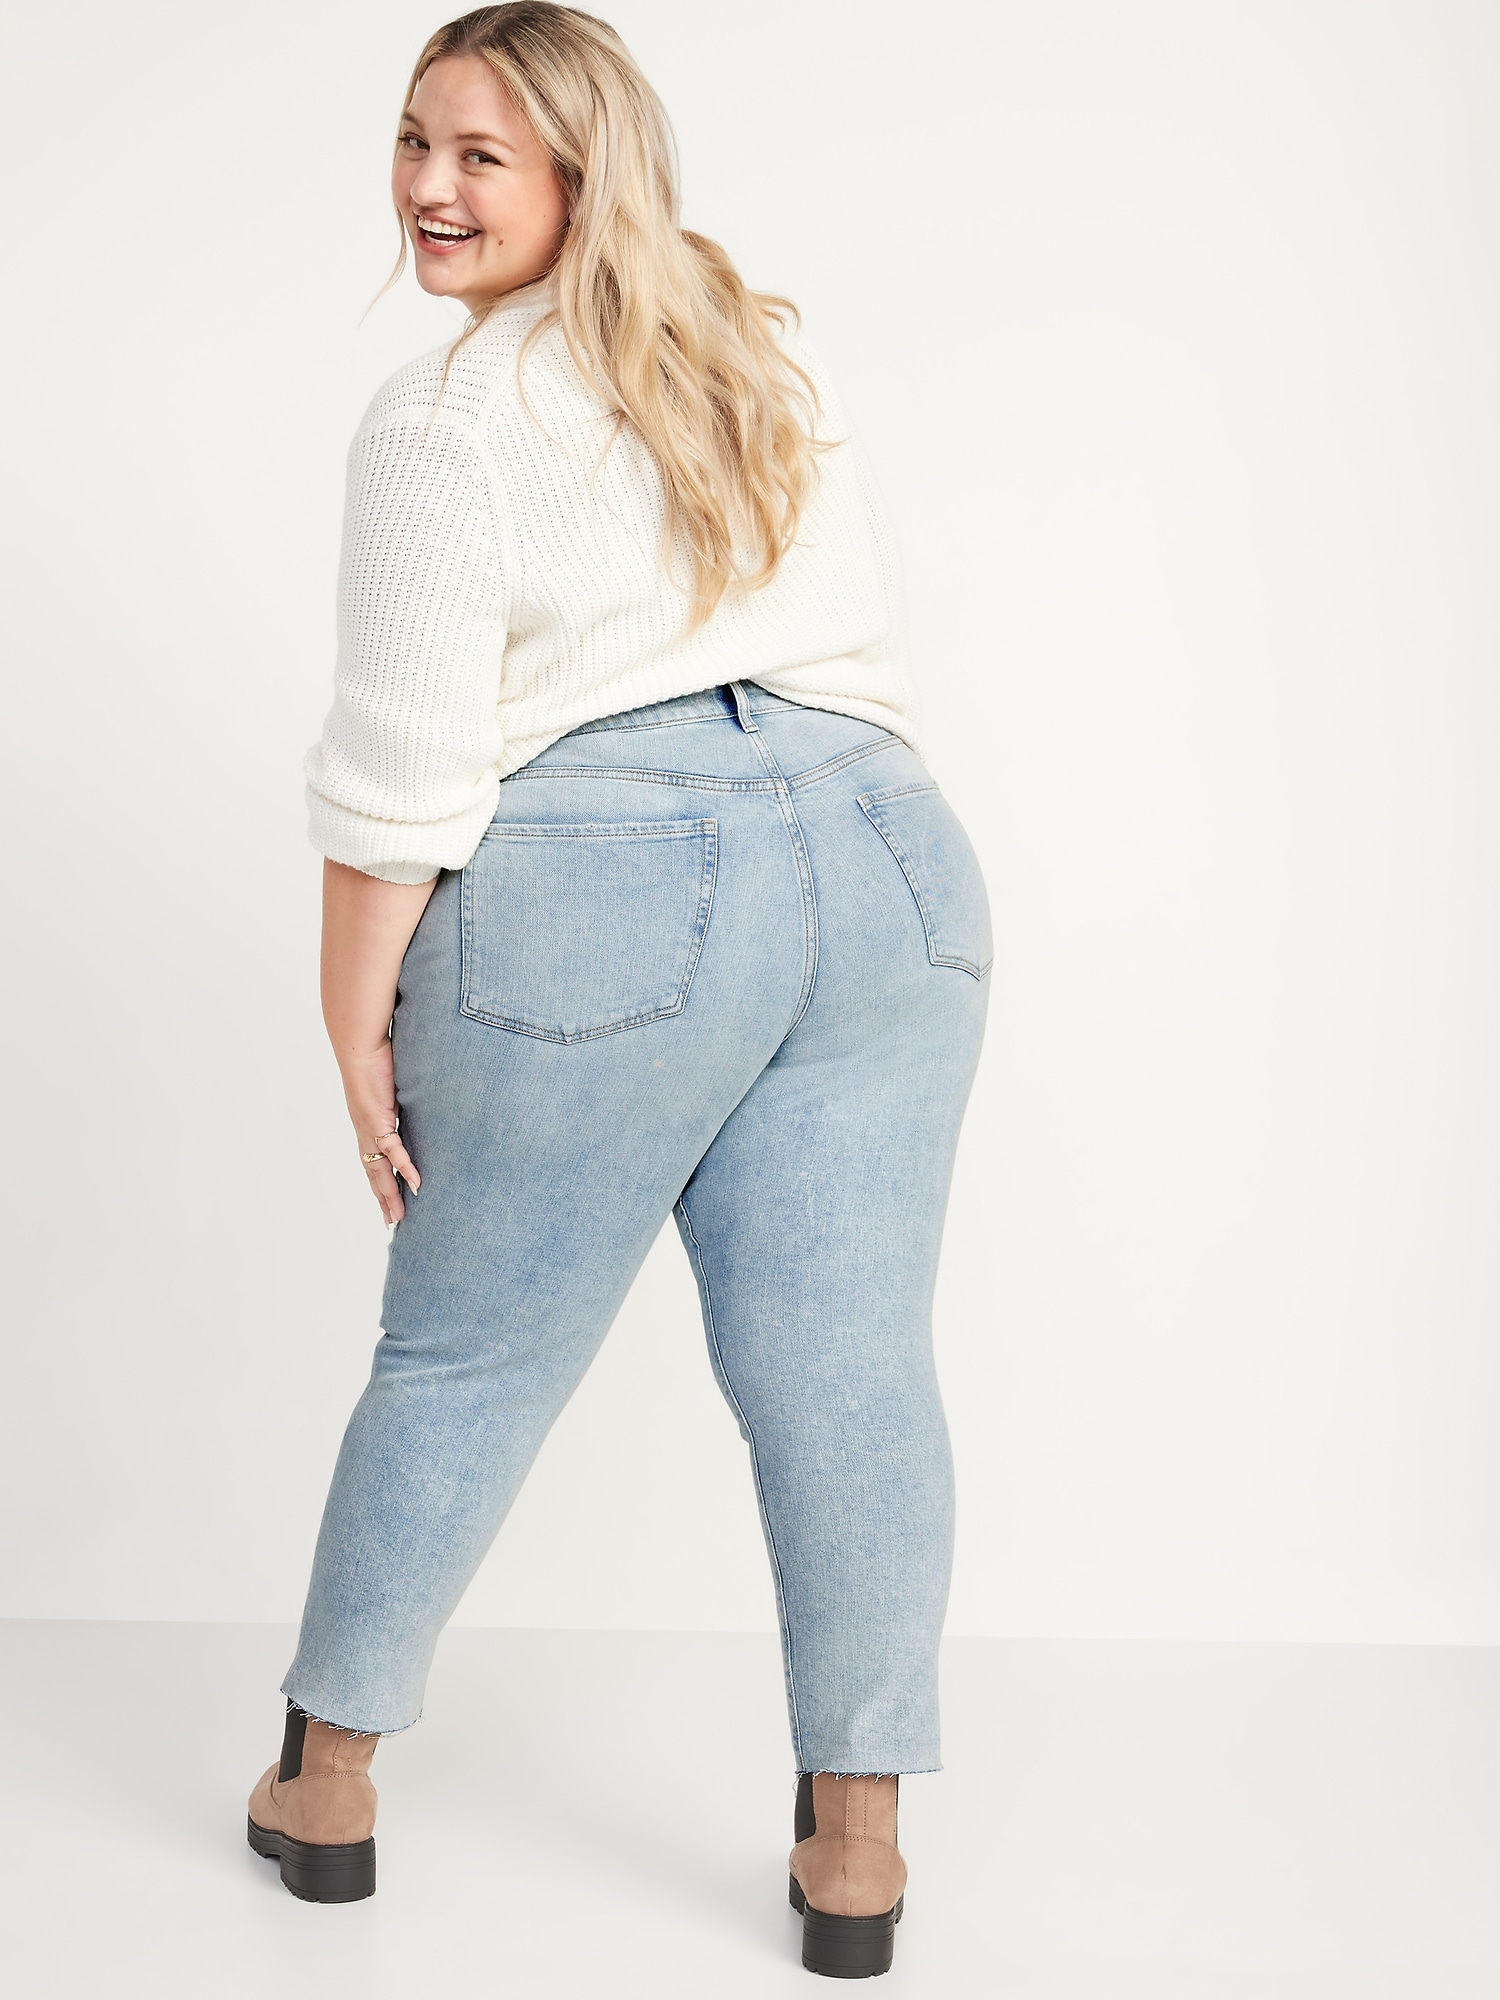 Curvy High-Waisted OG Straight Ripped Cut-Off Jeans for Women | Old Navy